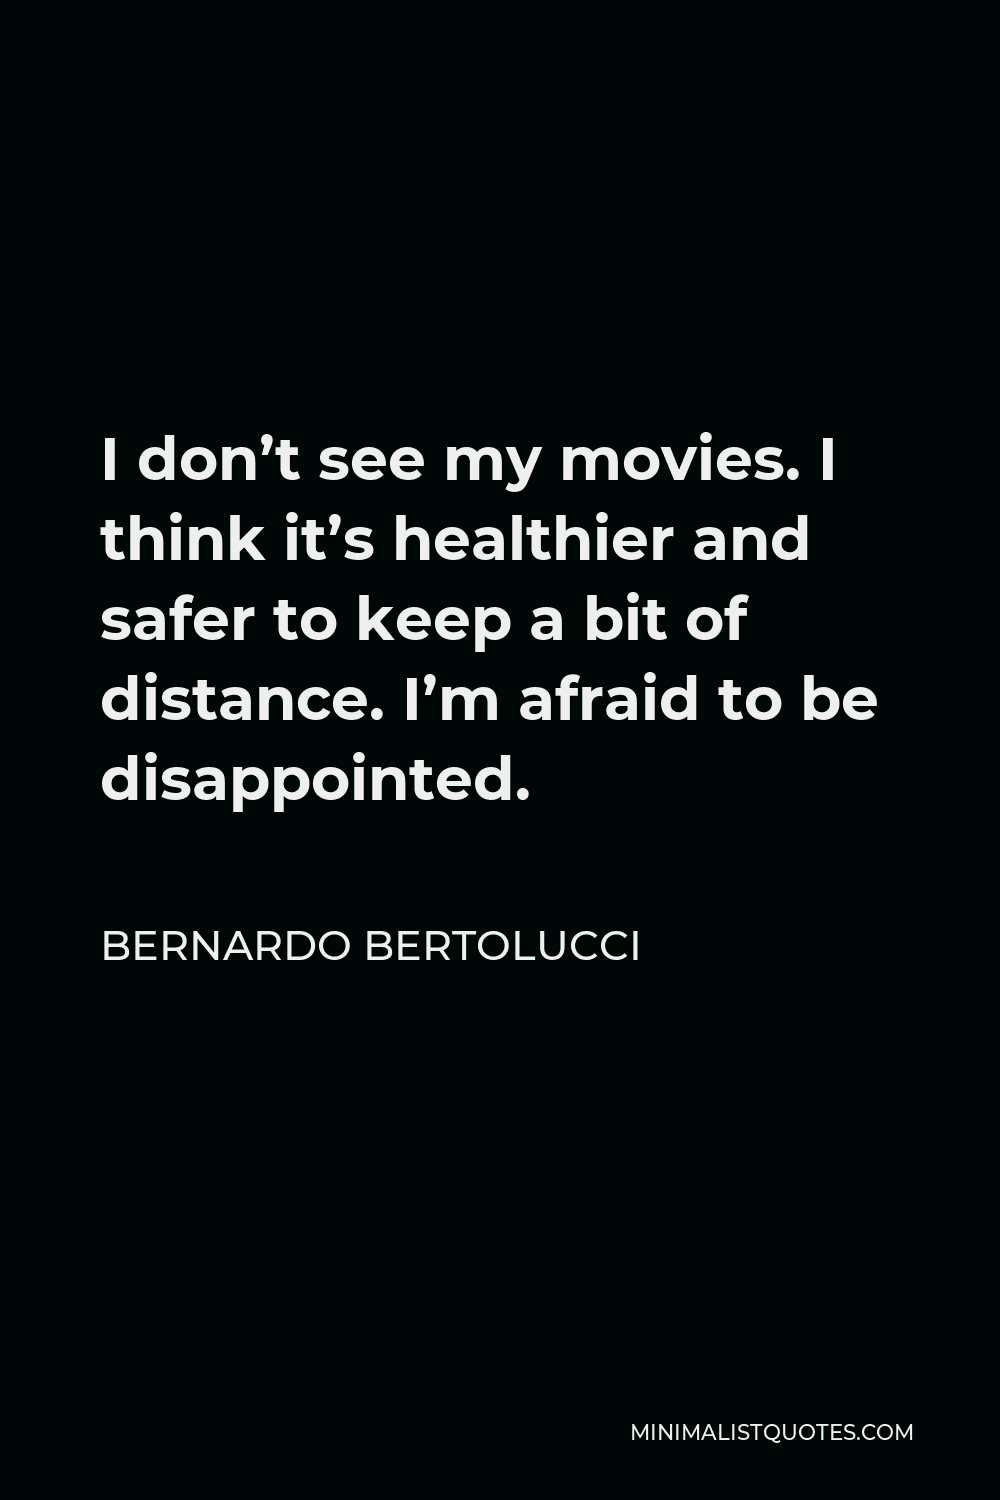 Bernardo Bertolucci Quote - I don’t see my movies. I think it’s healthier and safer to keep a bit of distance. I’m afraid to be disappointed.